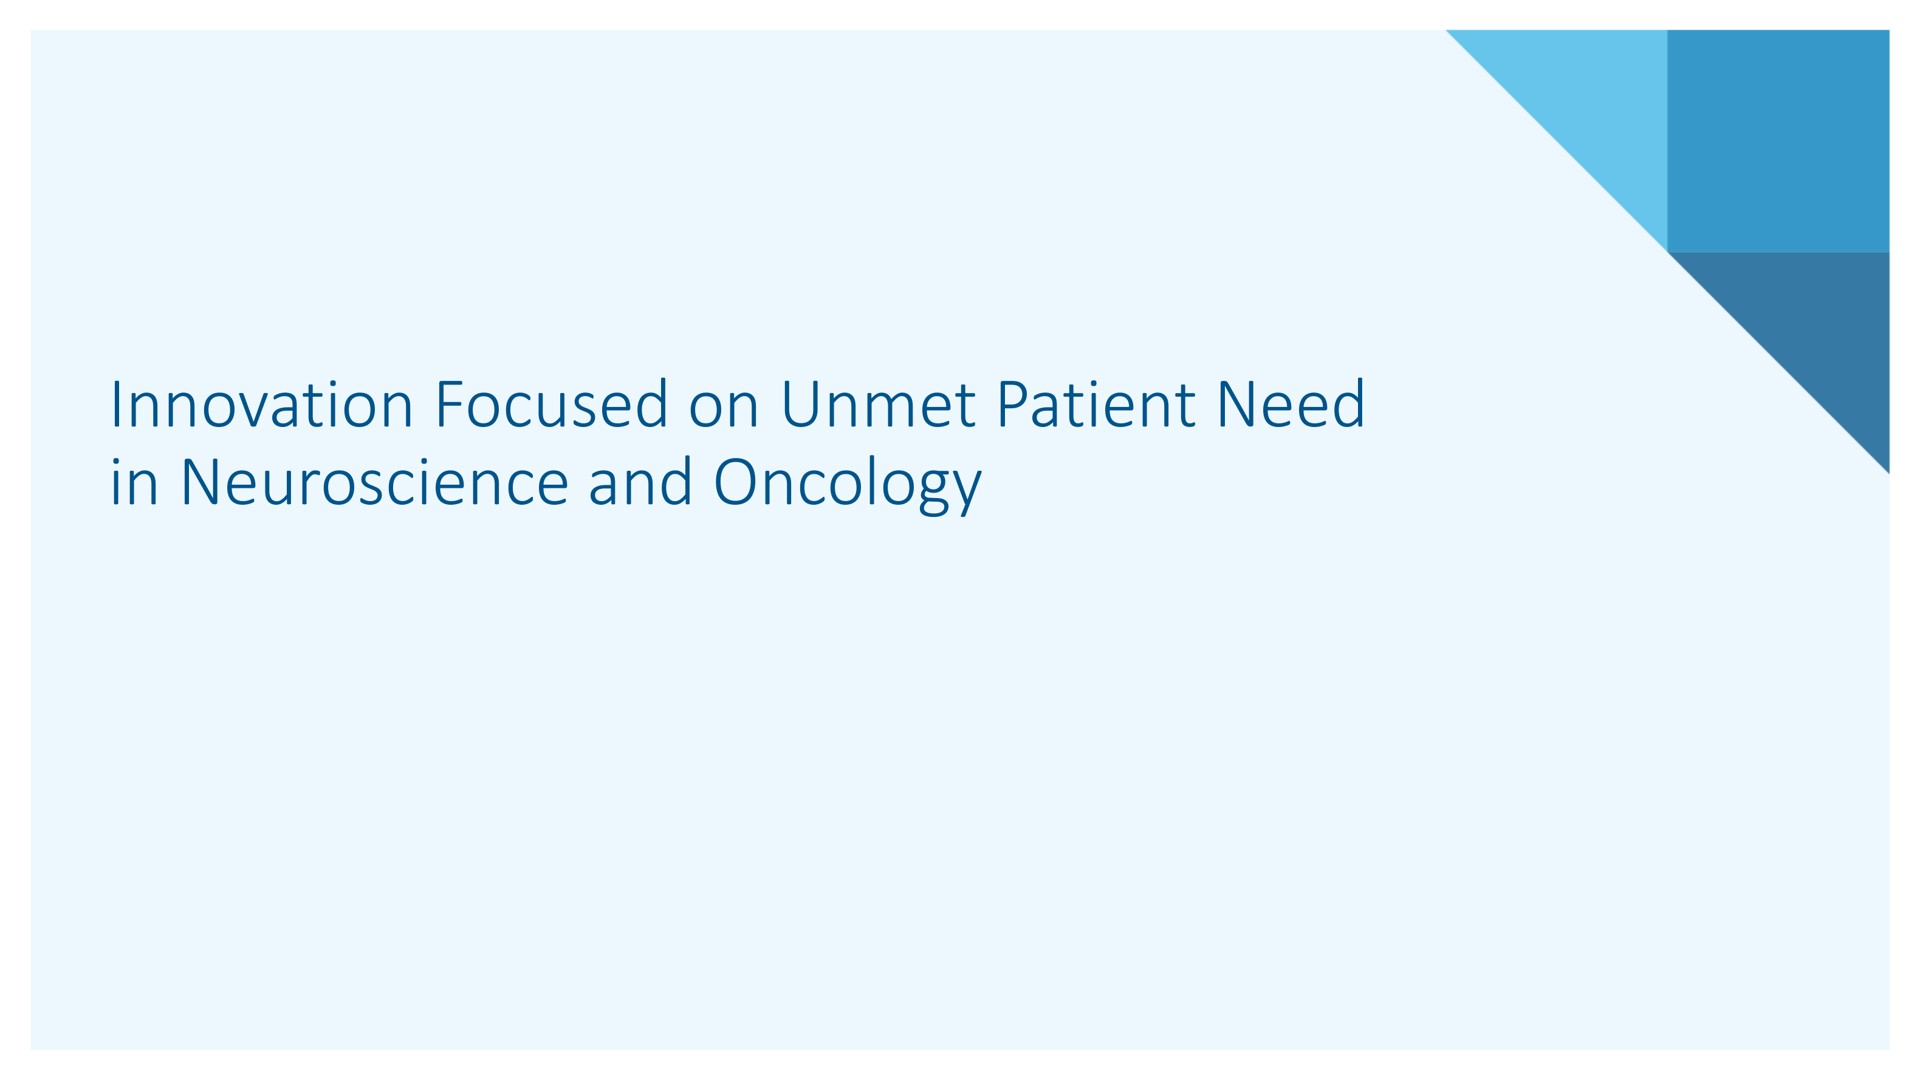 innovation focused on unmet patient need in and oncology | Alkermes